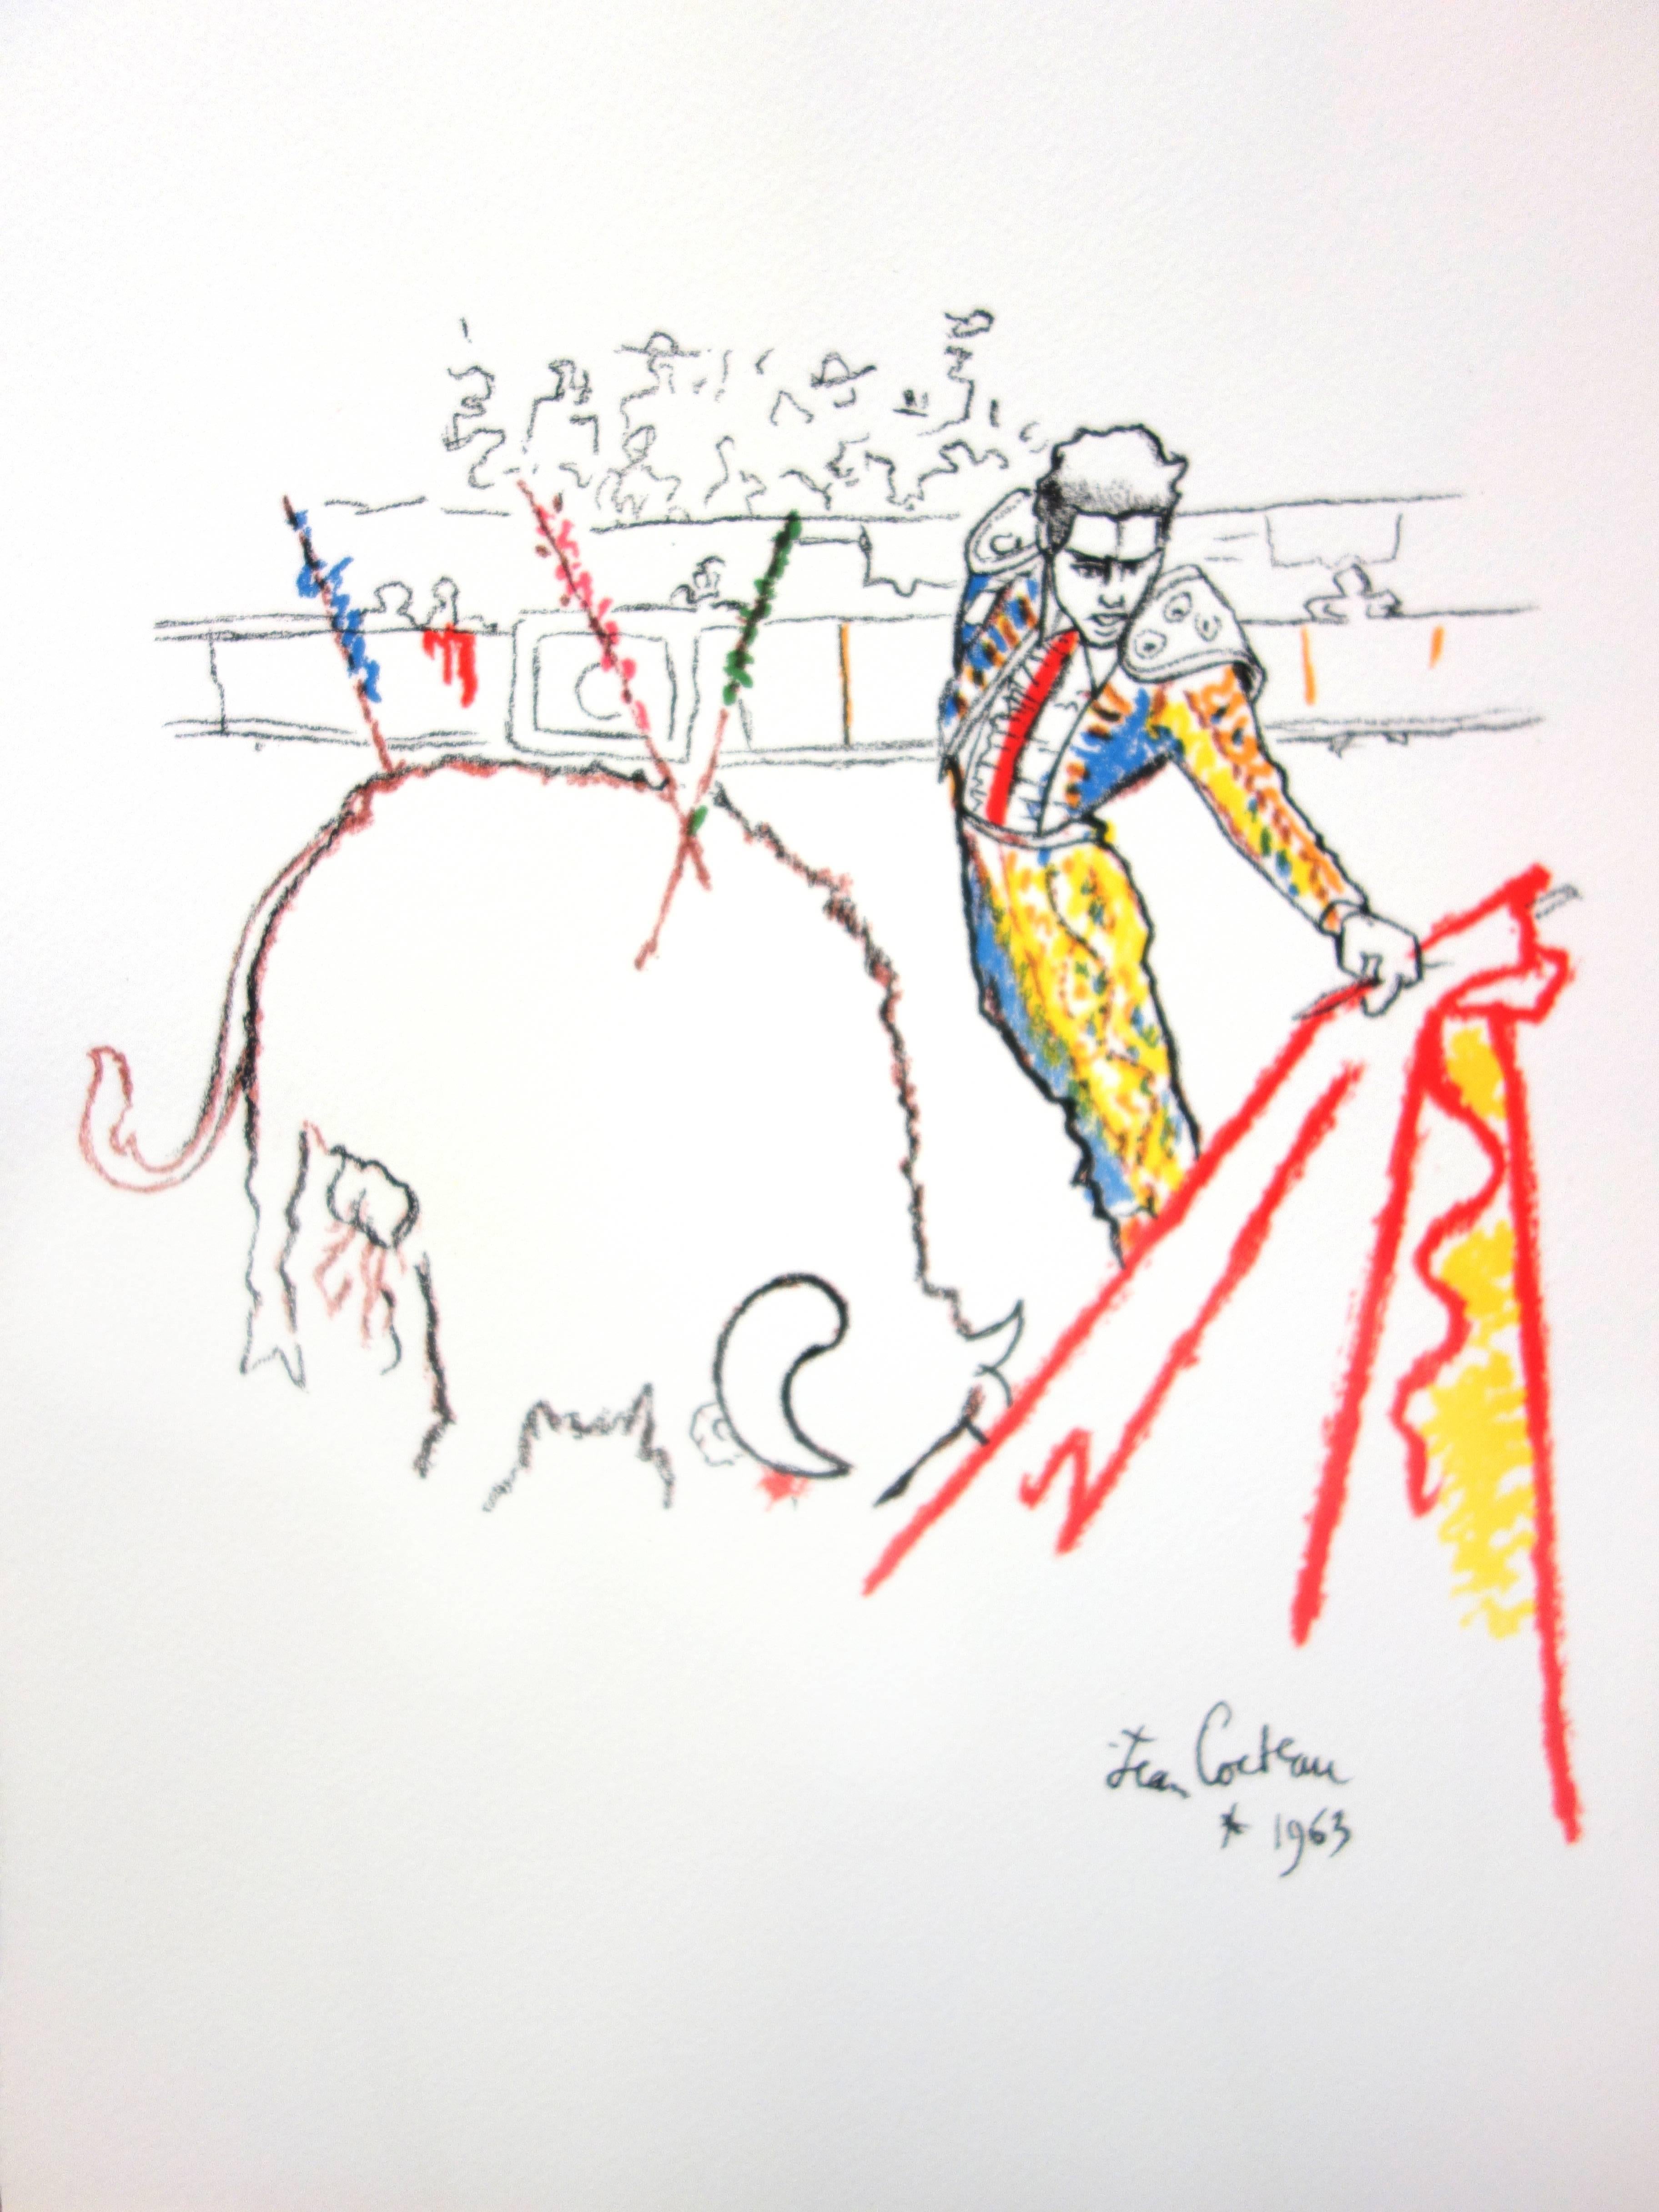 Original Lithograph by Jean Cocteau
Title: Taureaux
Signed in the plate
Dimensions: 40 x 30 cm
Edition: 200
Luxury print edition from the portfolio of Trinckvel
1965
From the last portfolio Cocteau worked on, finished shortly before he died.